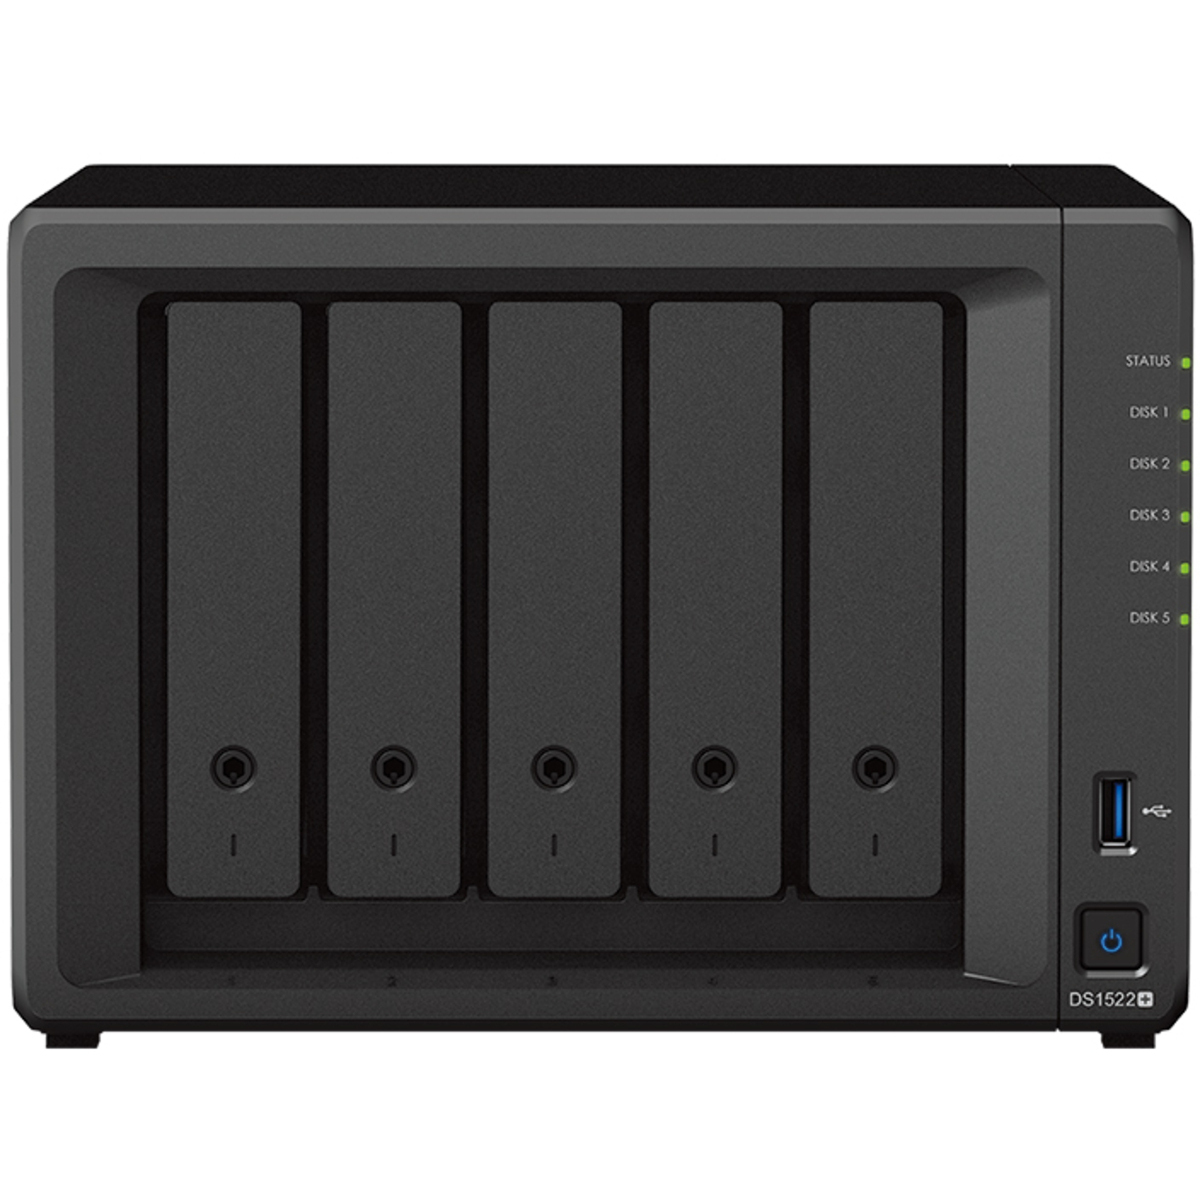 Synology DiskStation DS1522+ 110tb 5-Bay Desktop Multimedia / Power User / Business NAS - Network Attached Storage Device 5x22tb Seagate EXOS X22 ST22000NM001E 3.5 7200rpm SATA 6Gb/s HDD ENTERPRISE Class Drives Installed - Burn-In Tested - ON SALE DiskStation DS1522+